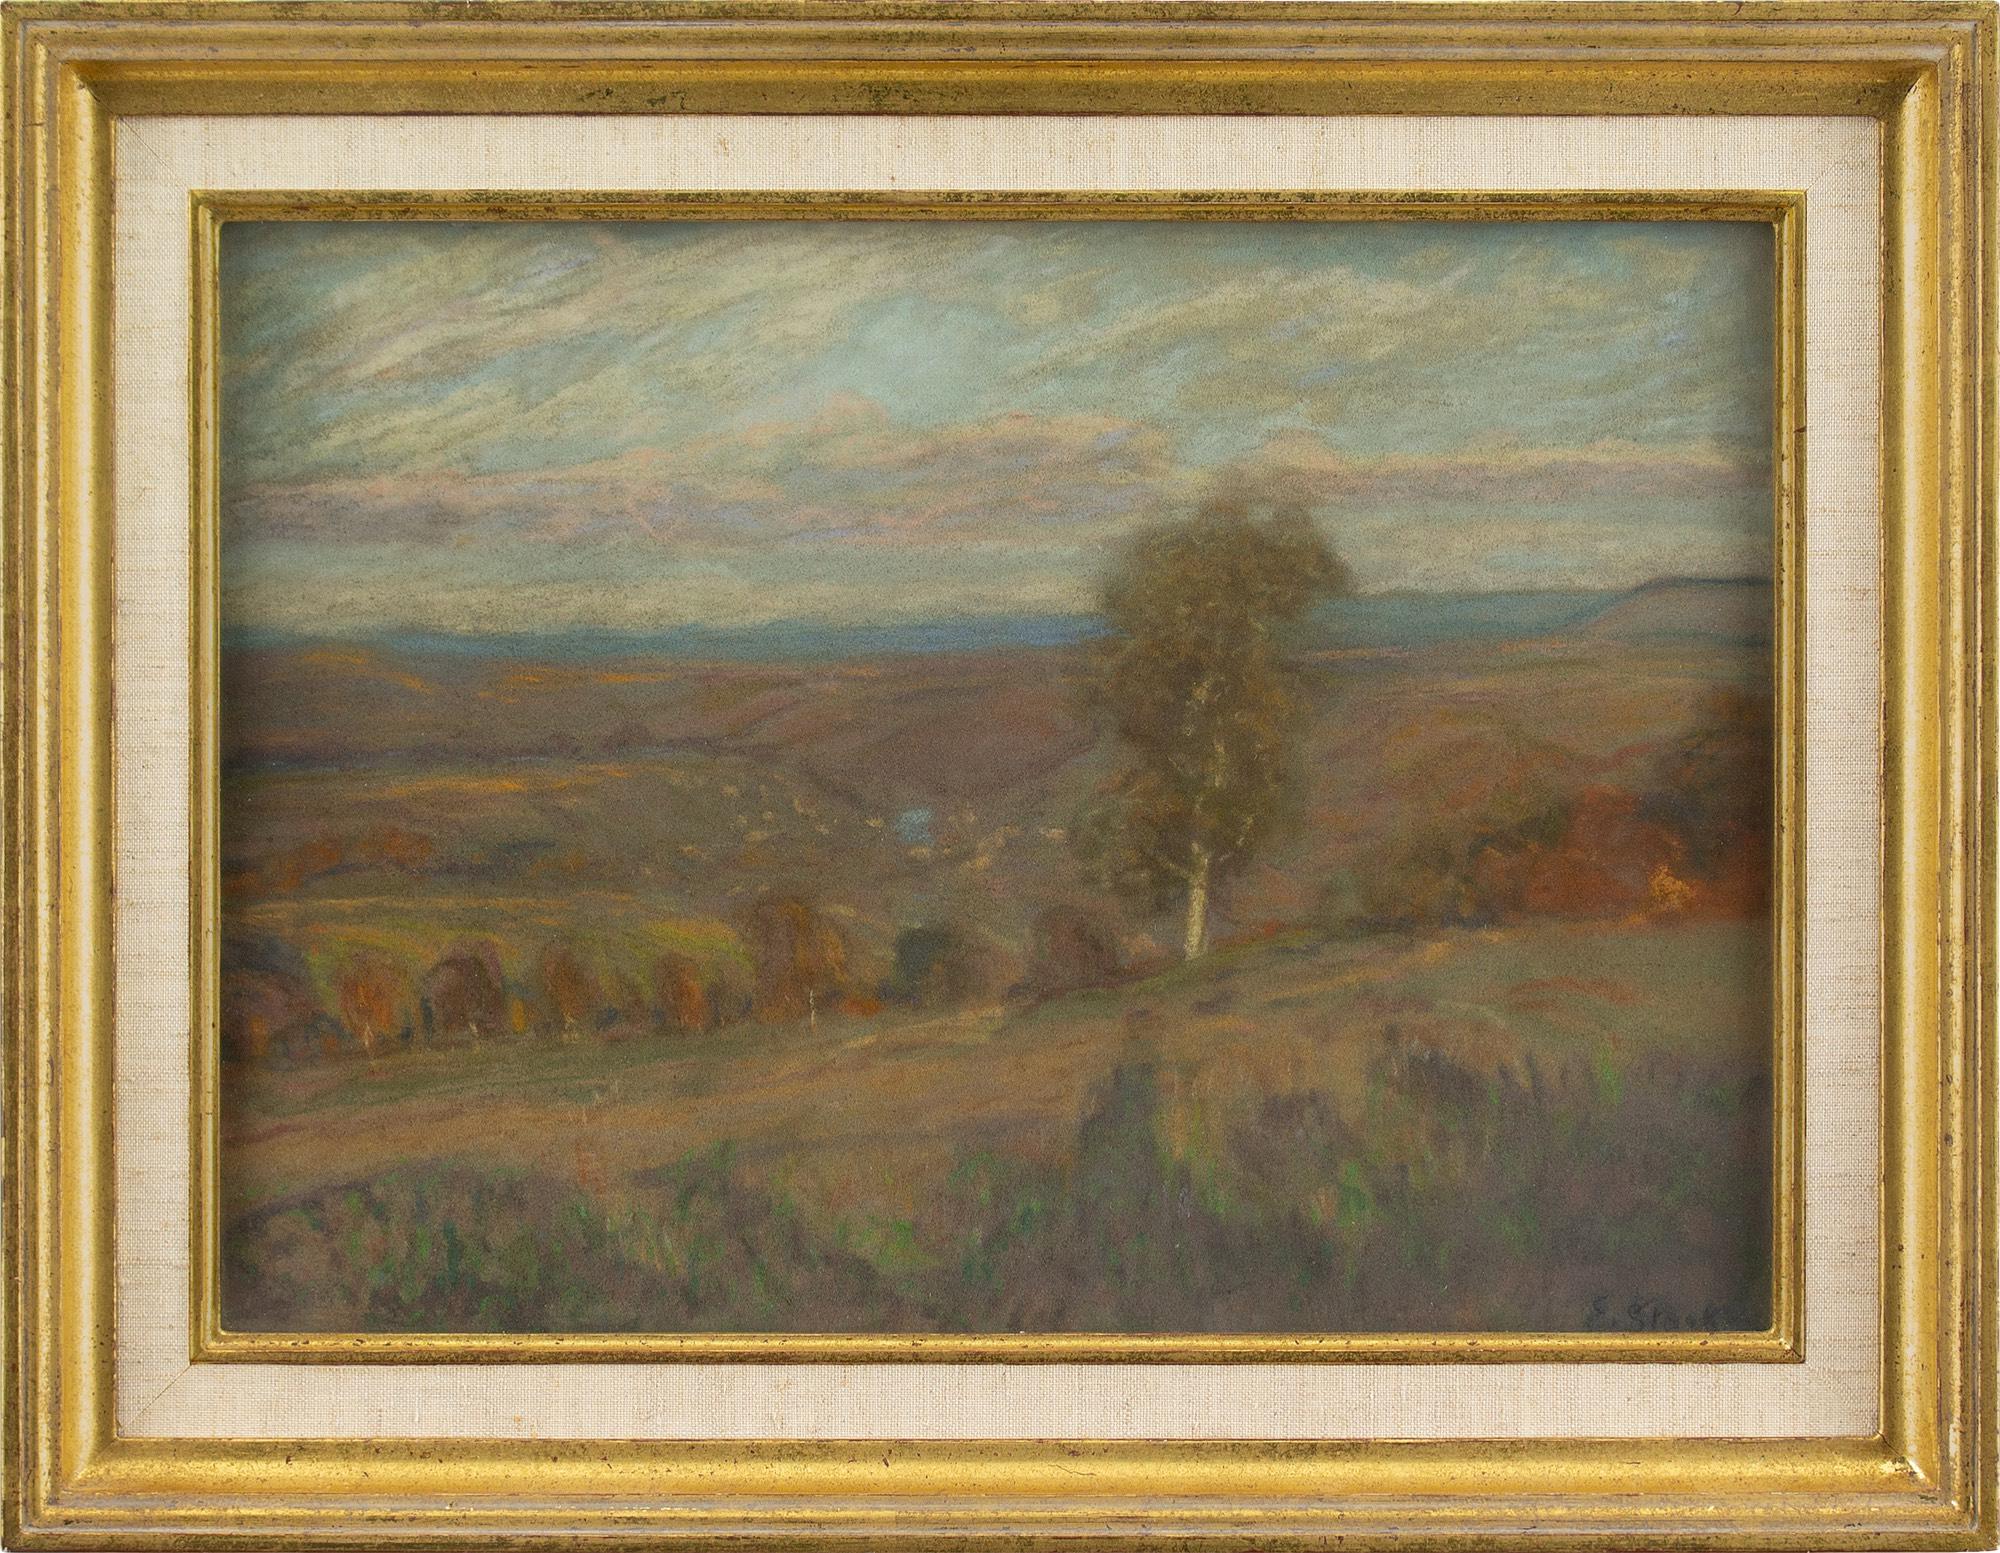 This evocative early 20th-century pastel by German artist Erwin Starker (1872-1938) captures a rolling view in the Neckar Valley, near Stuttgart. An impressive tumble of colours undulate across autumnal hills - culminating in a stripe of blue.

In